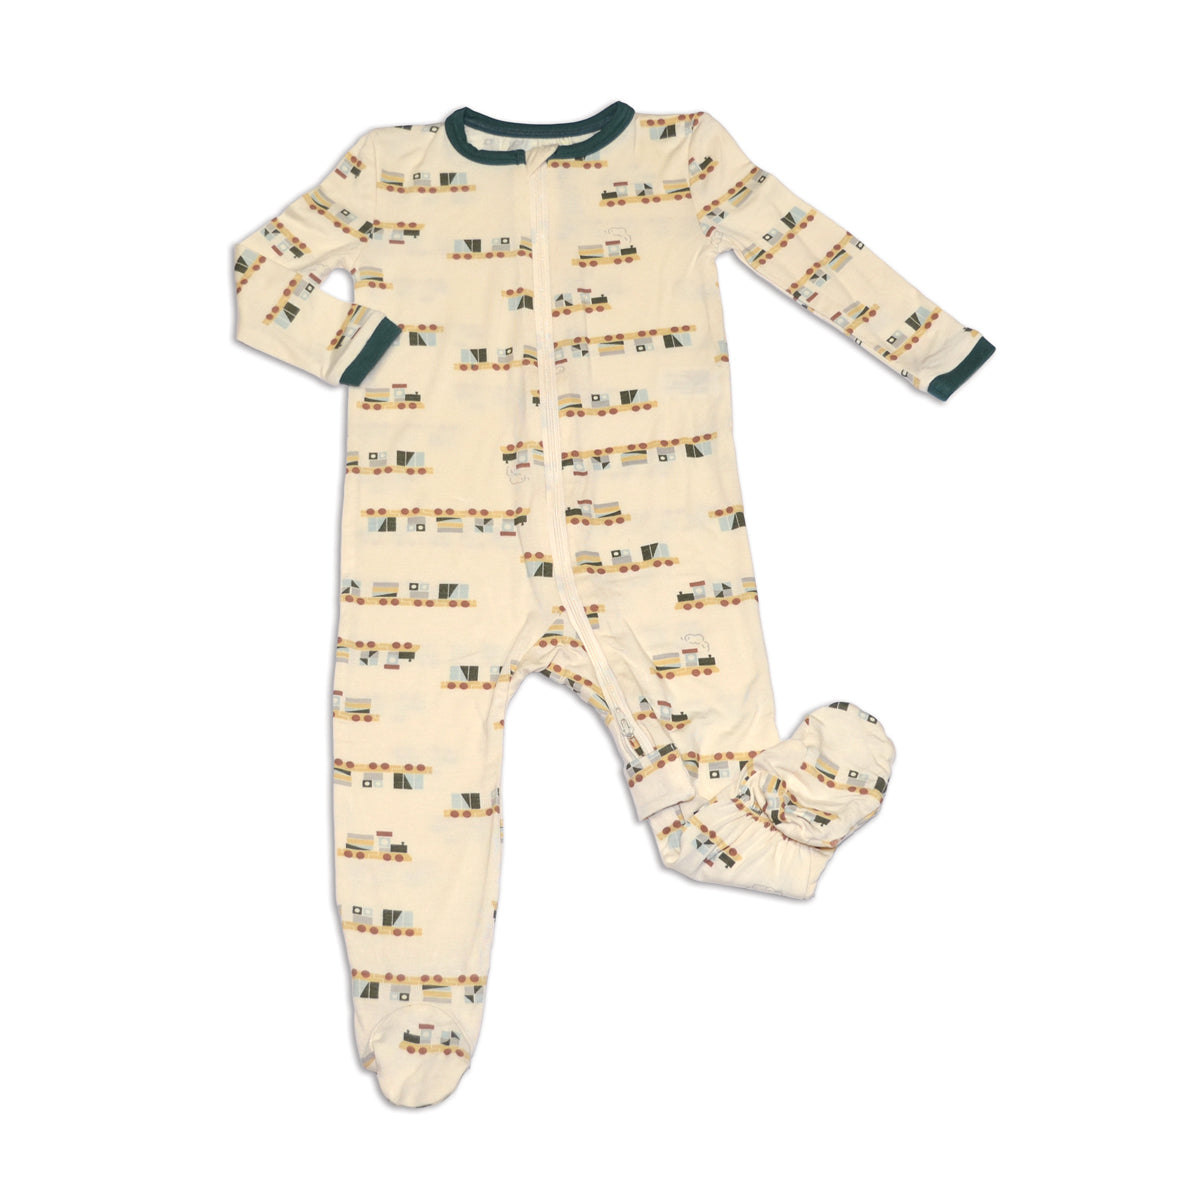 Silkberry Baby Bamboo Footed PJ’s | Keep Them Little BB